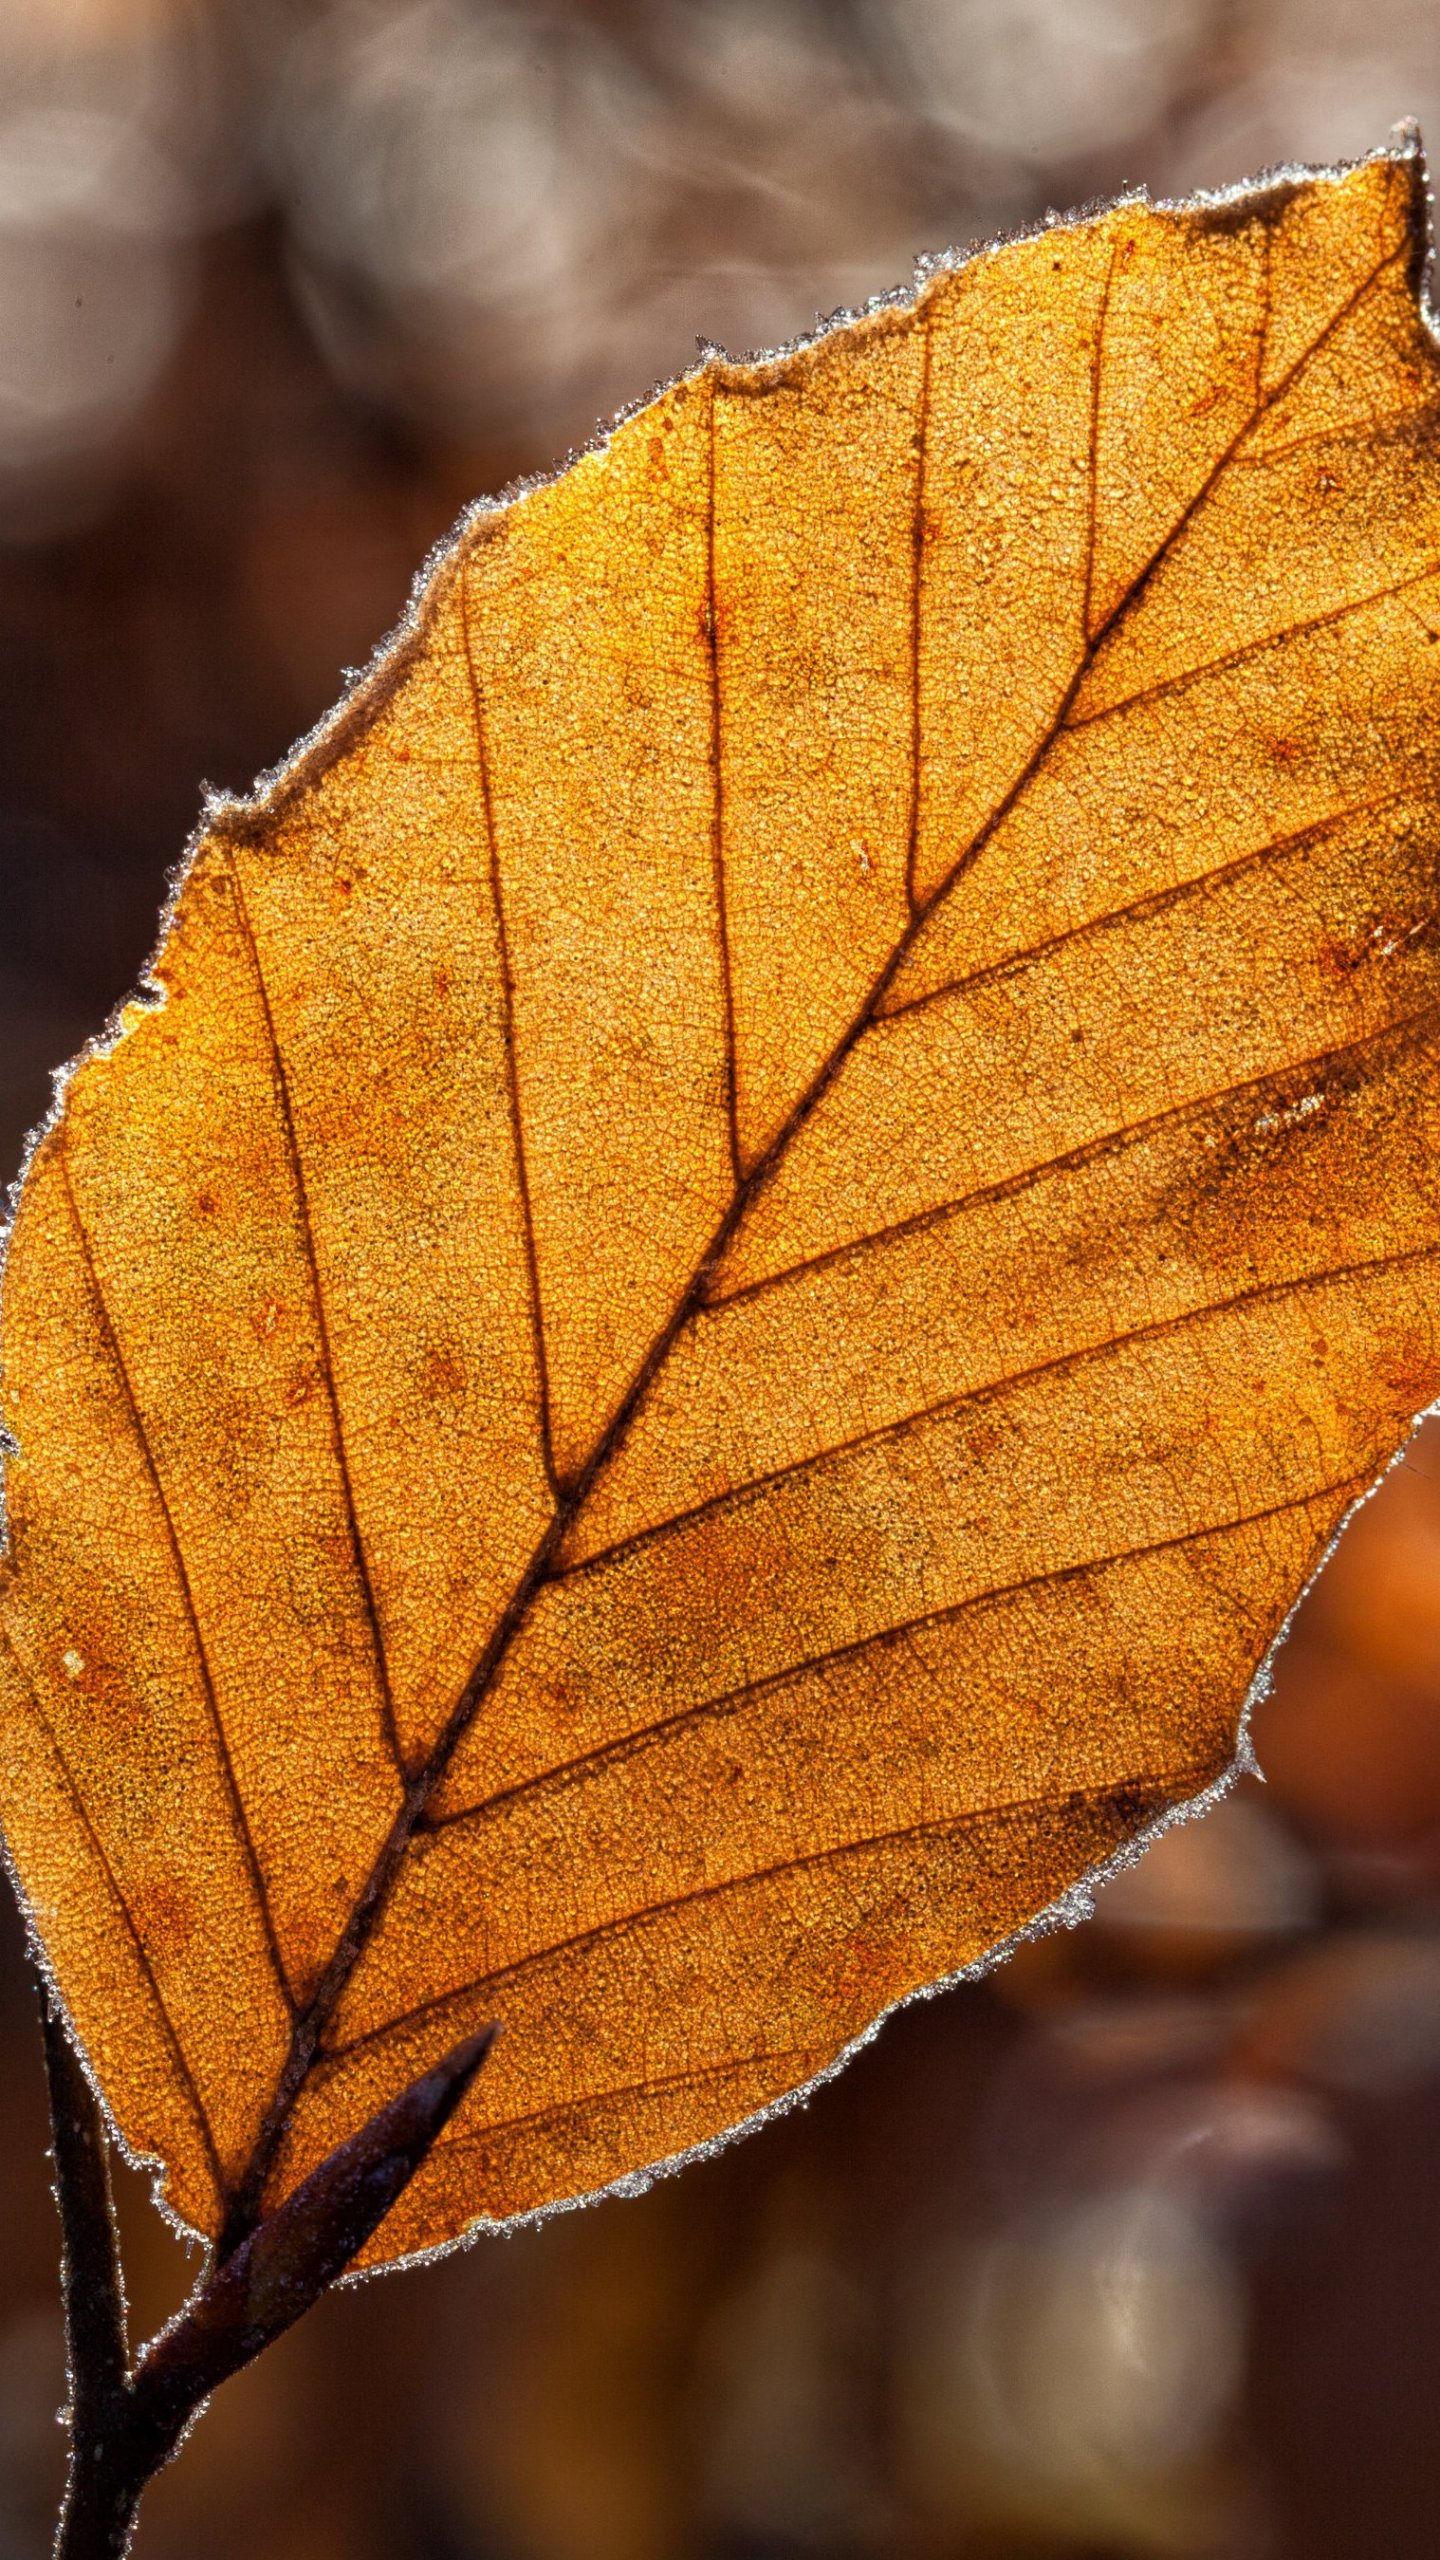 Dried Leaf in the Light Wallpaper - iPhone, Android & Desktop Backgrounds